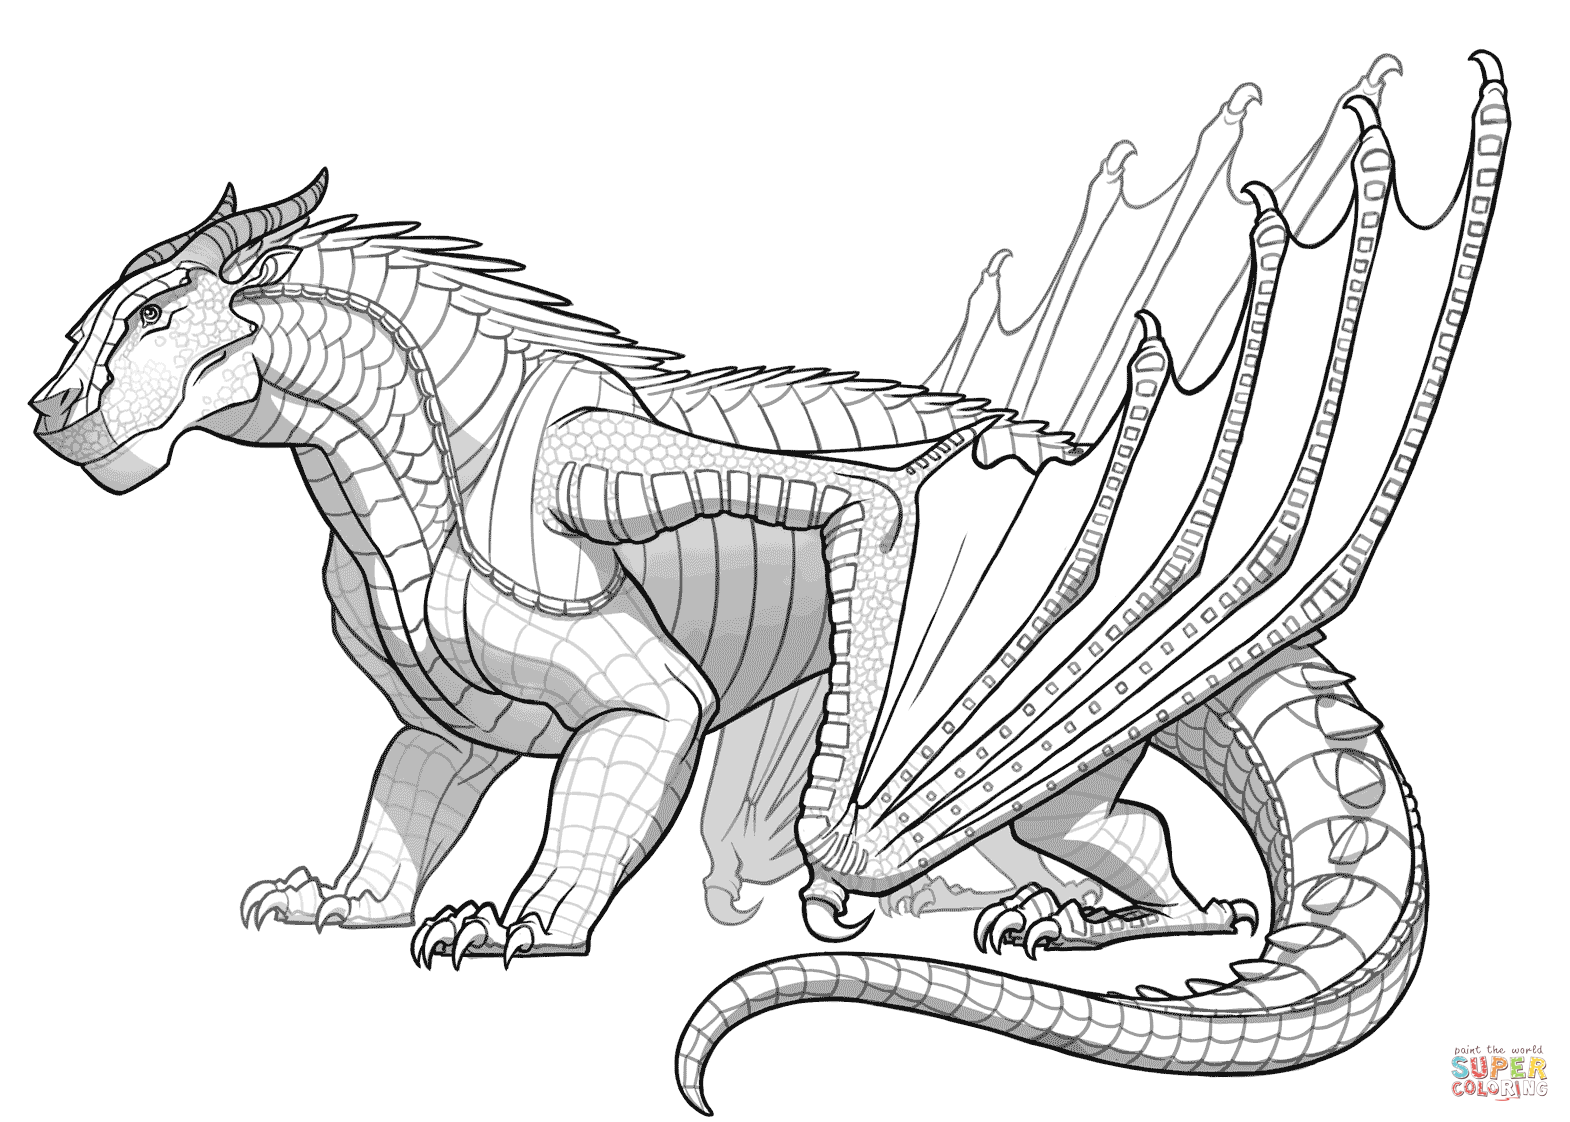 Mudwing dragon from wings of fire coloring page free printable coloring pages